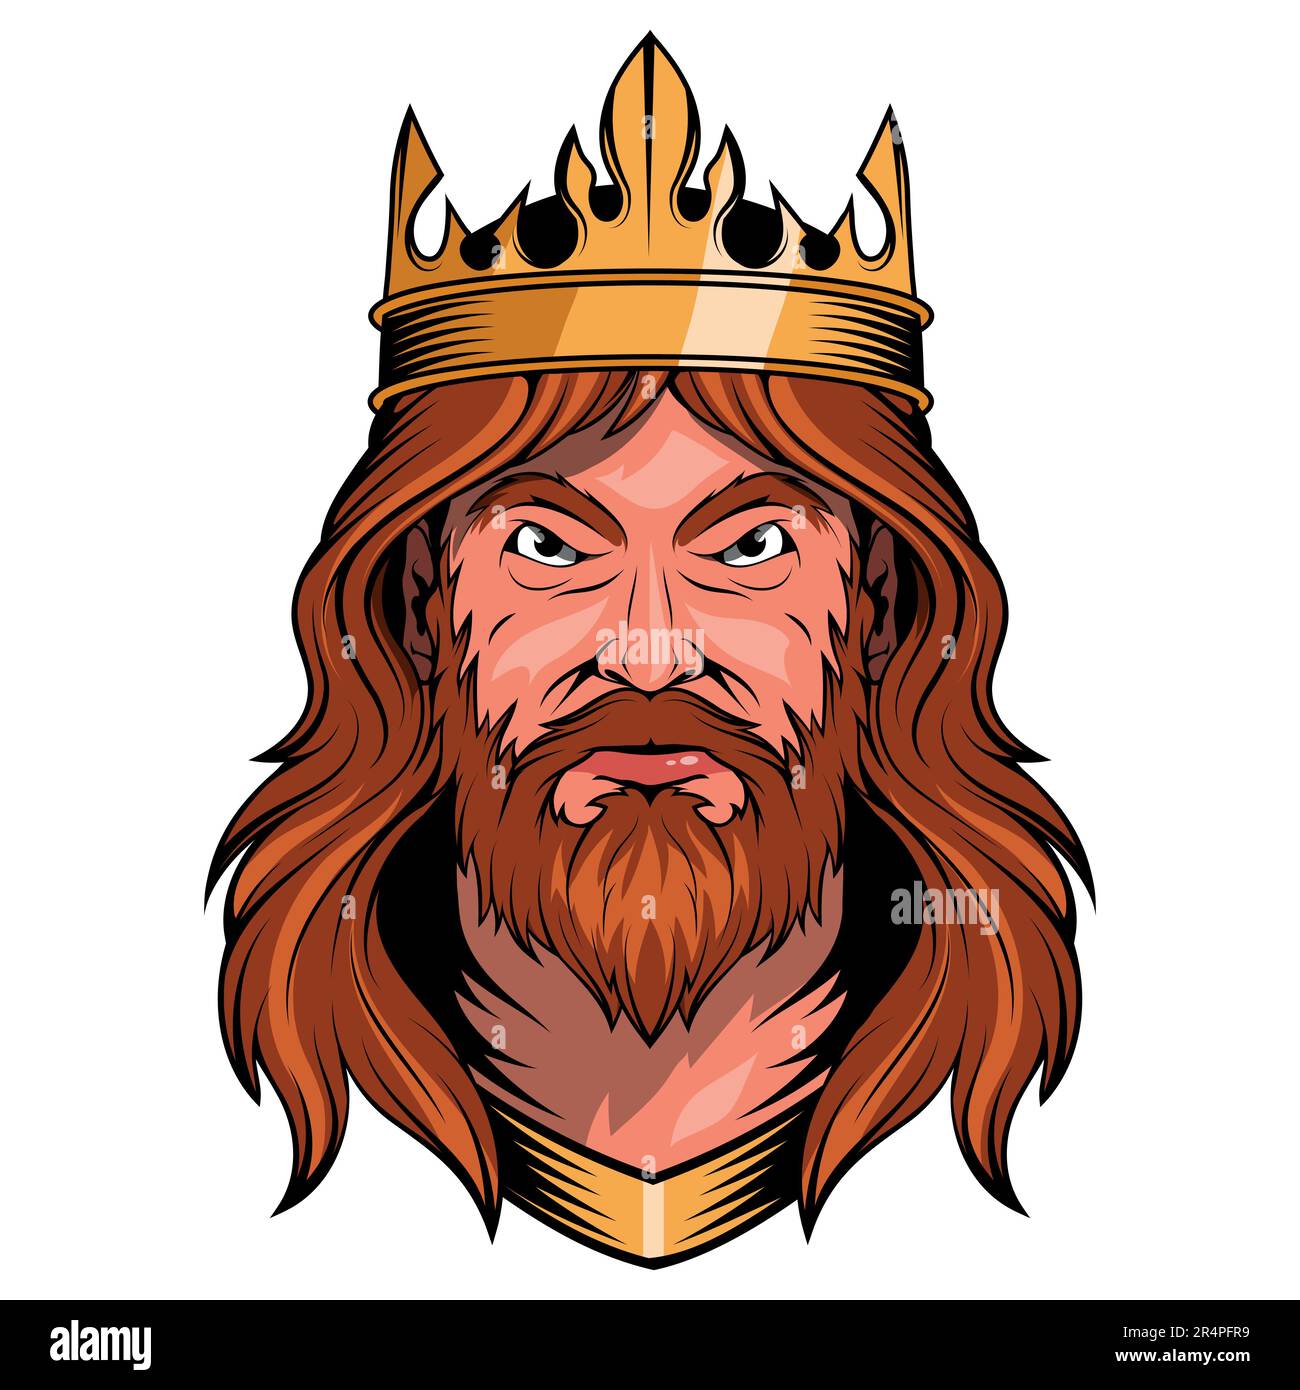 King. Vector illustration of a warrior king. A strong, brave king with ...